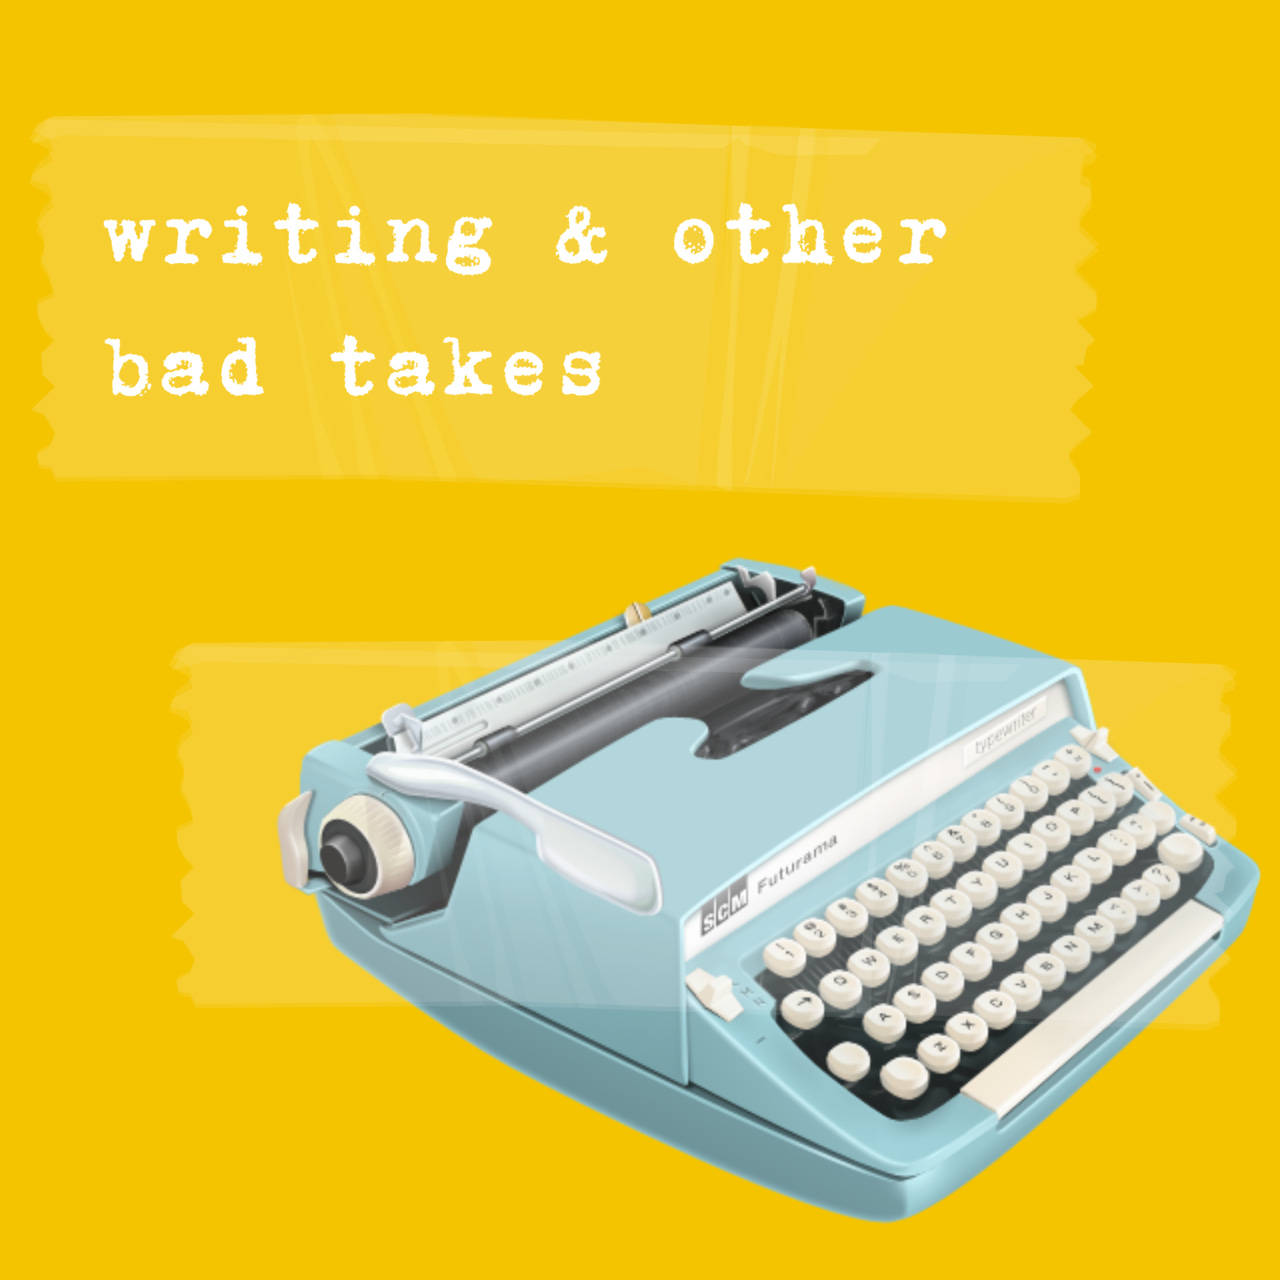 Chris Cocca: Writing & Other Bad Takes